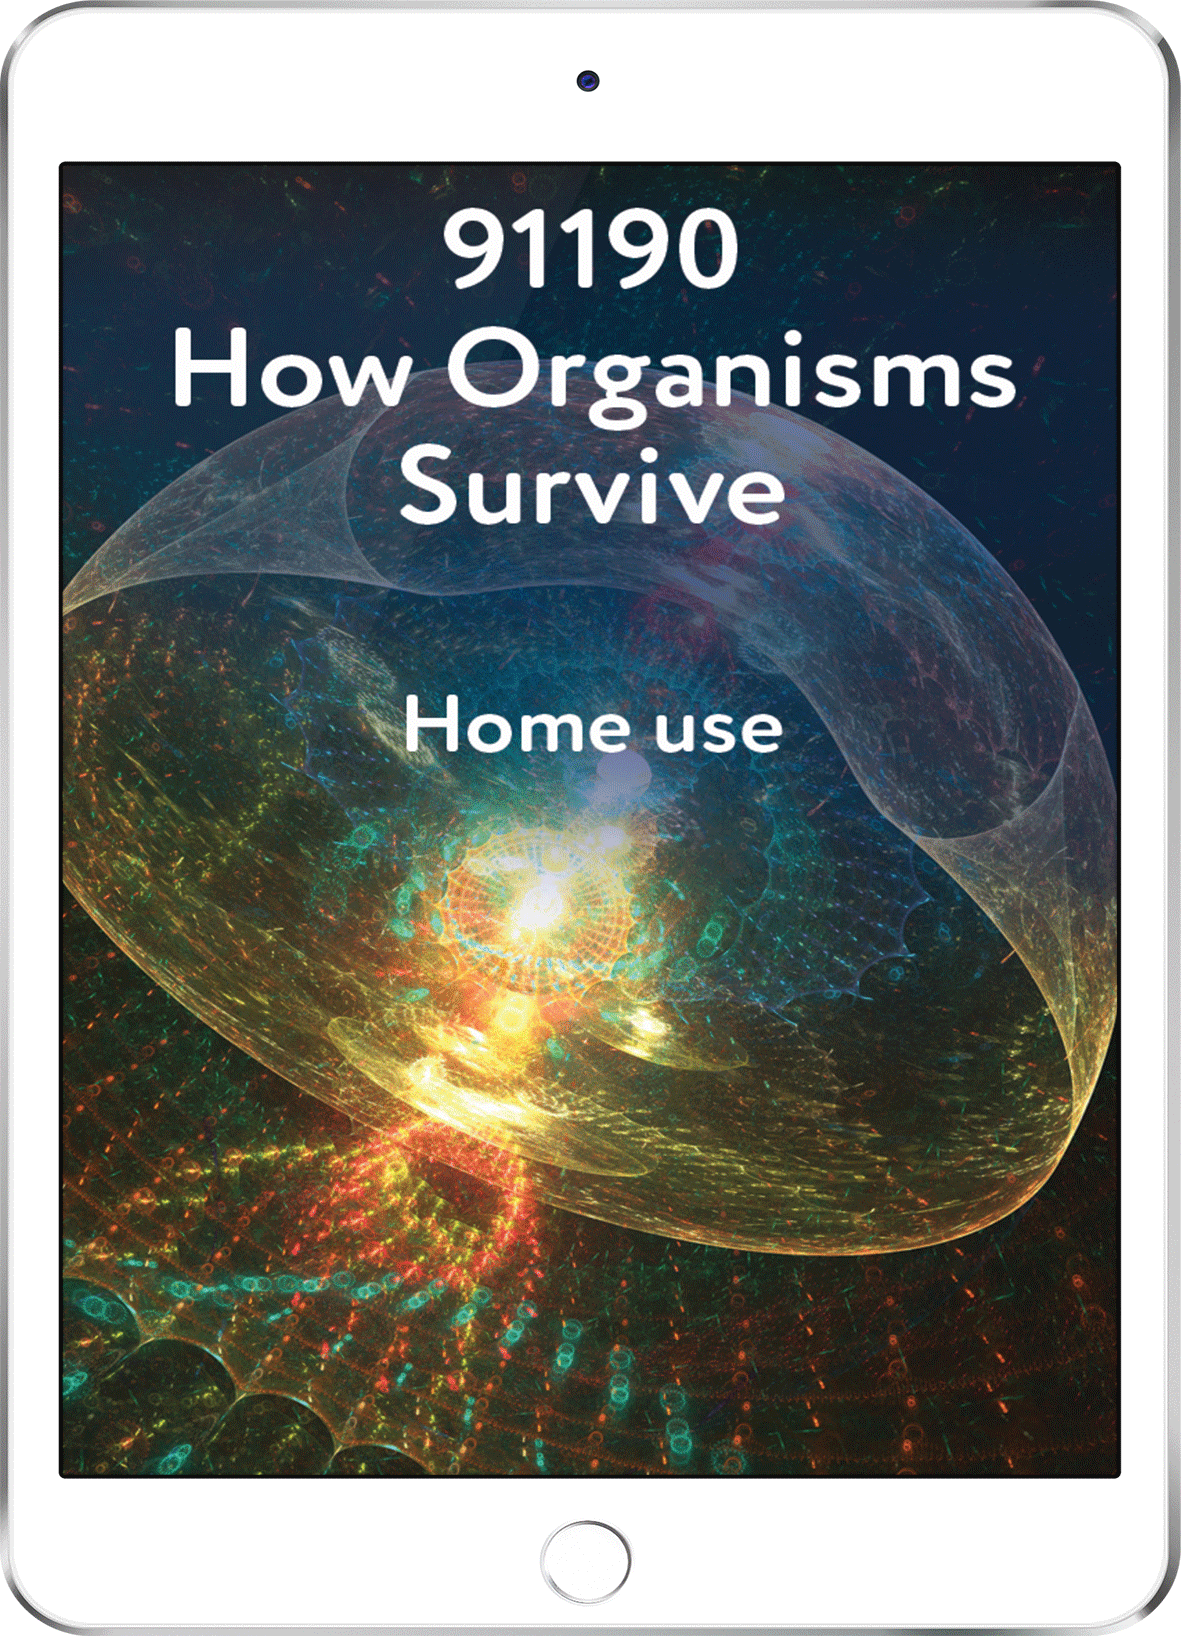 91190 How Organisms Survive - Home Use